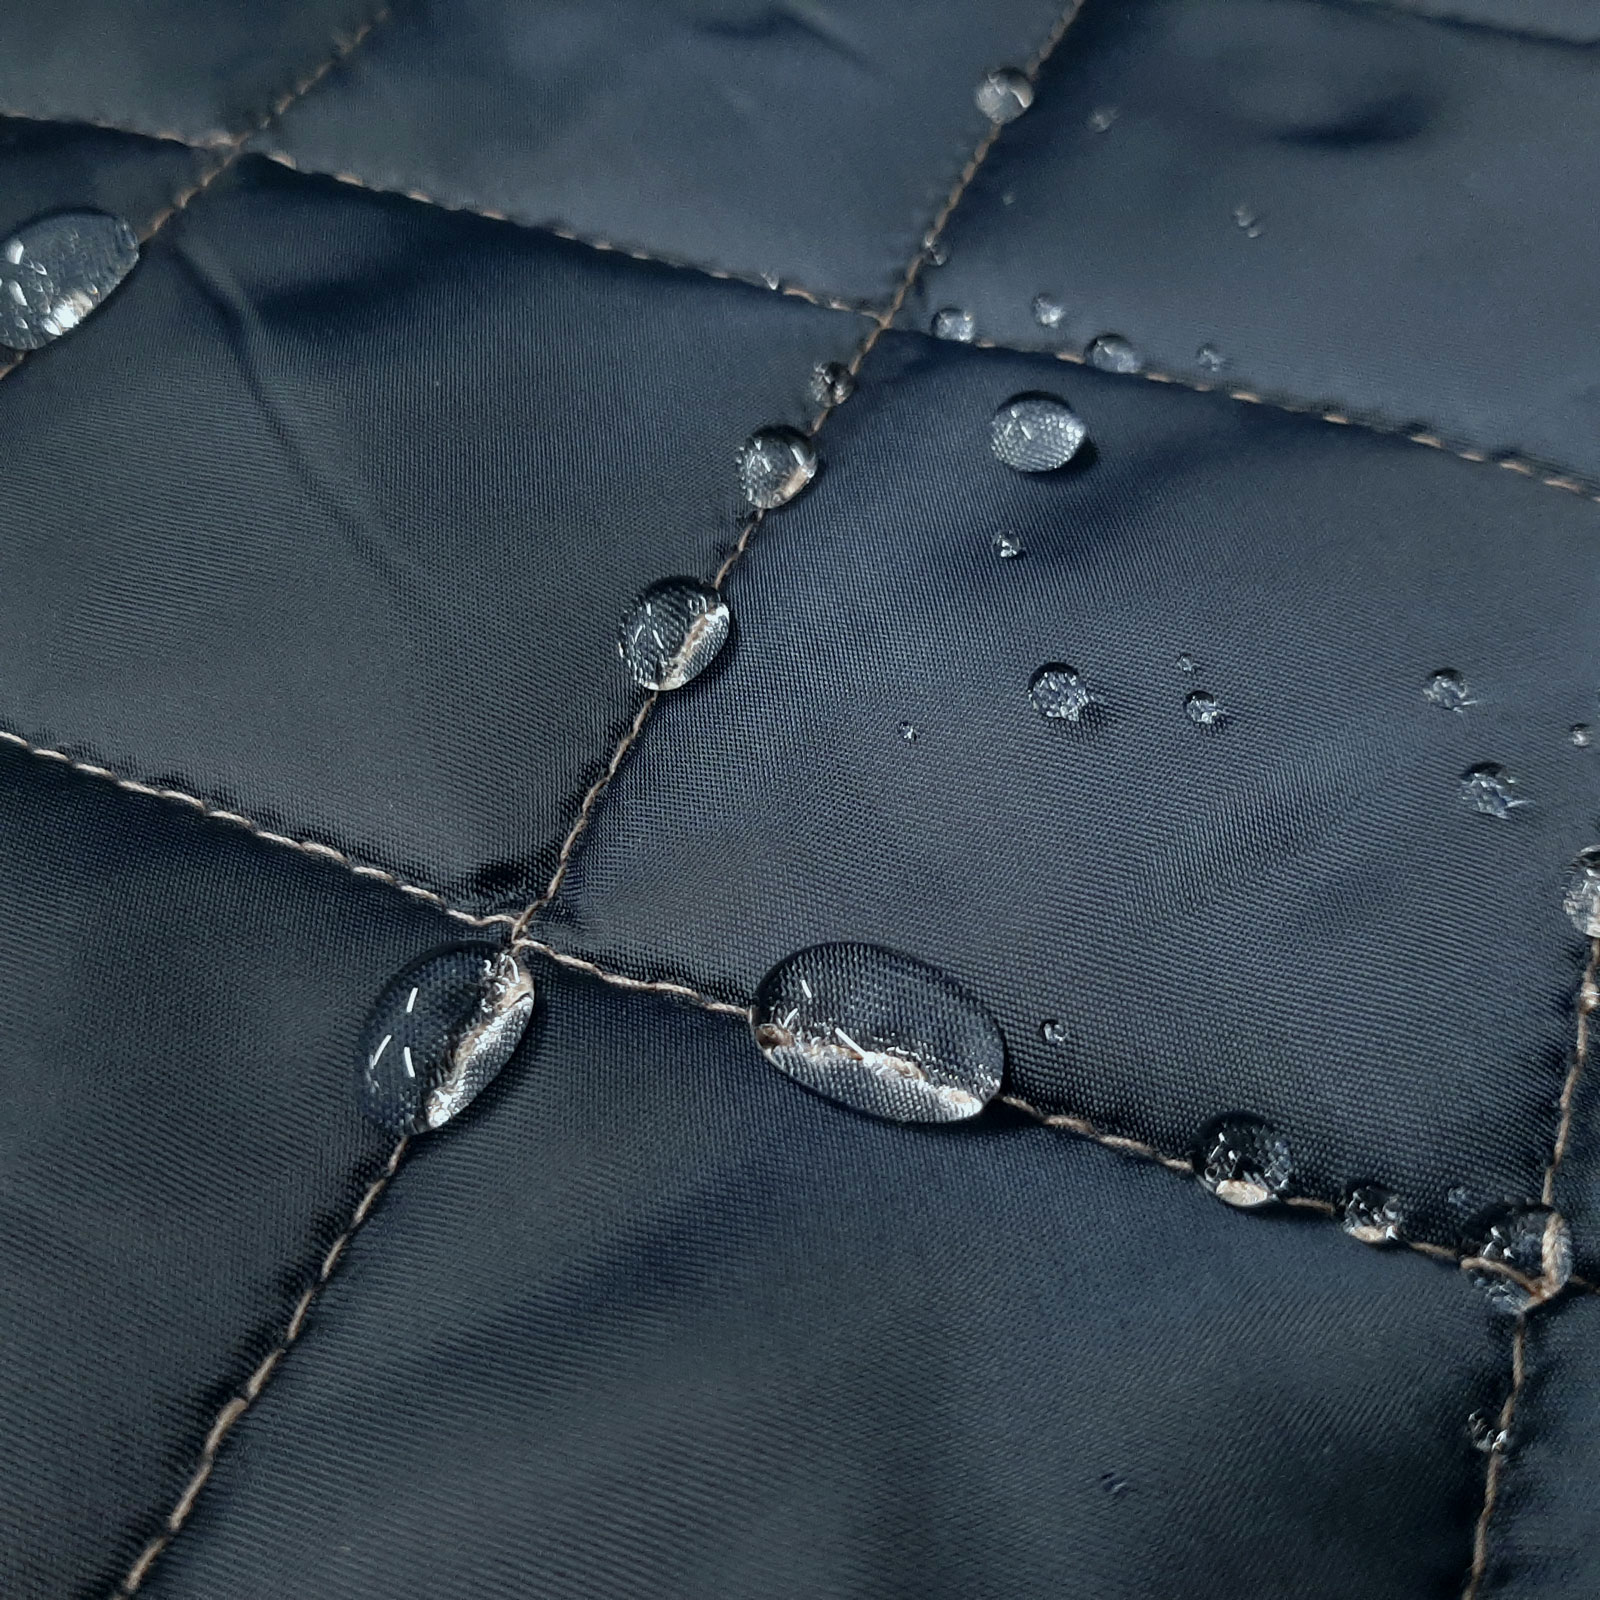 Universe - Check top quilting - water repellent - Navy / Khaki